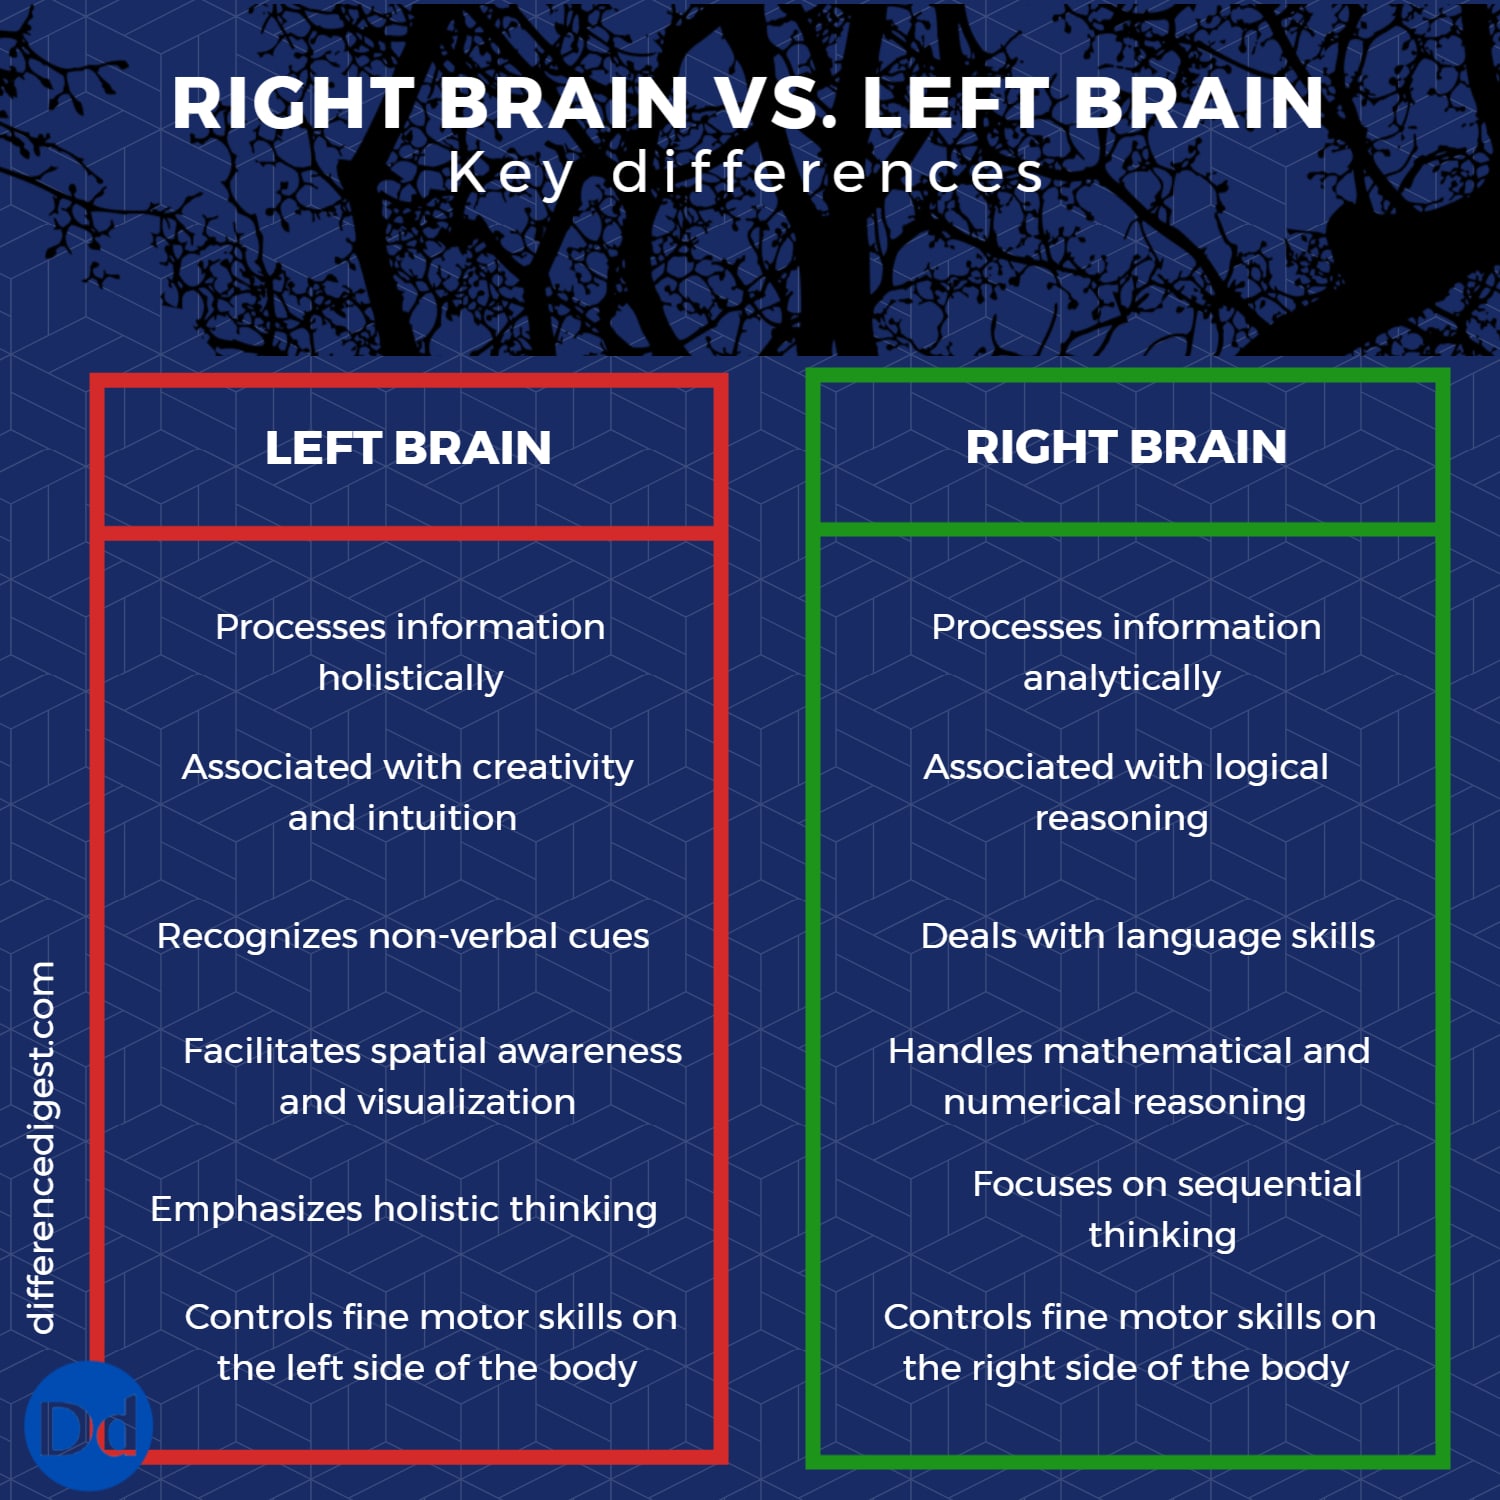 picture of key differences between right brain and left brain